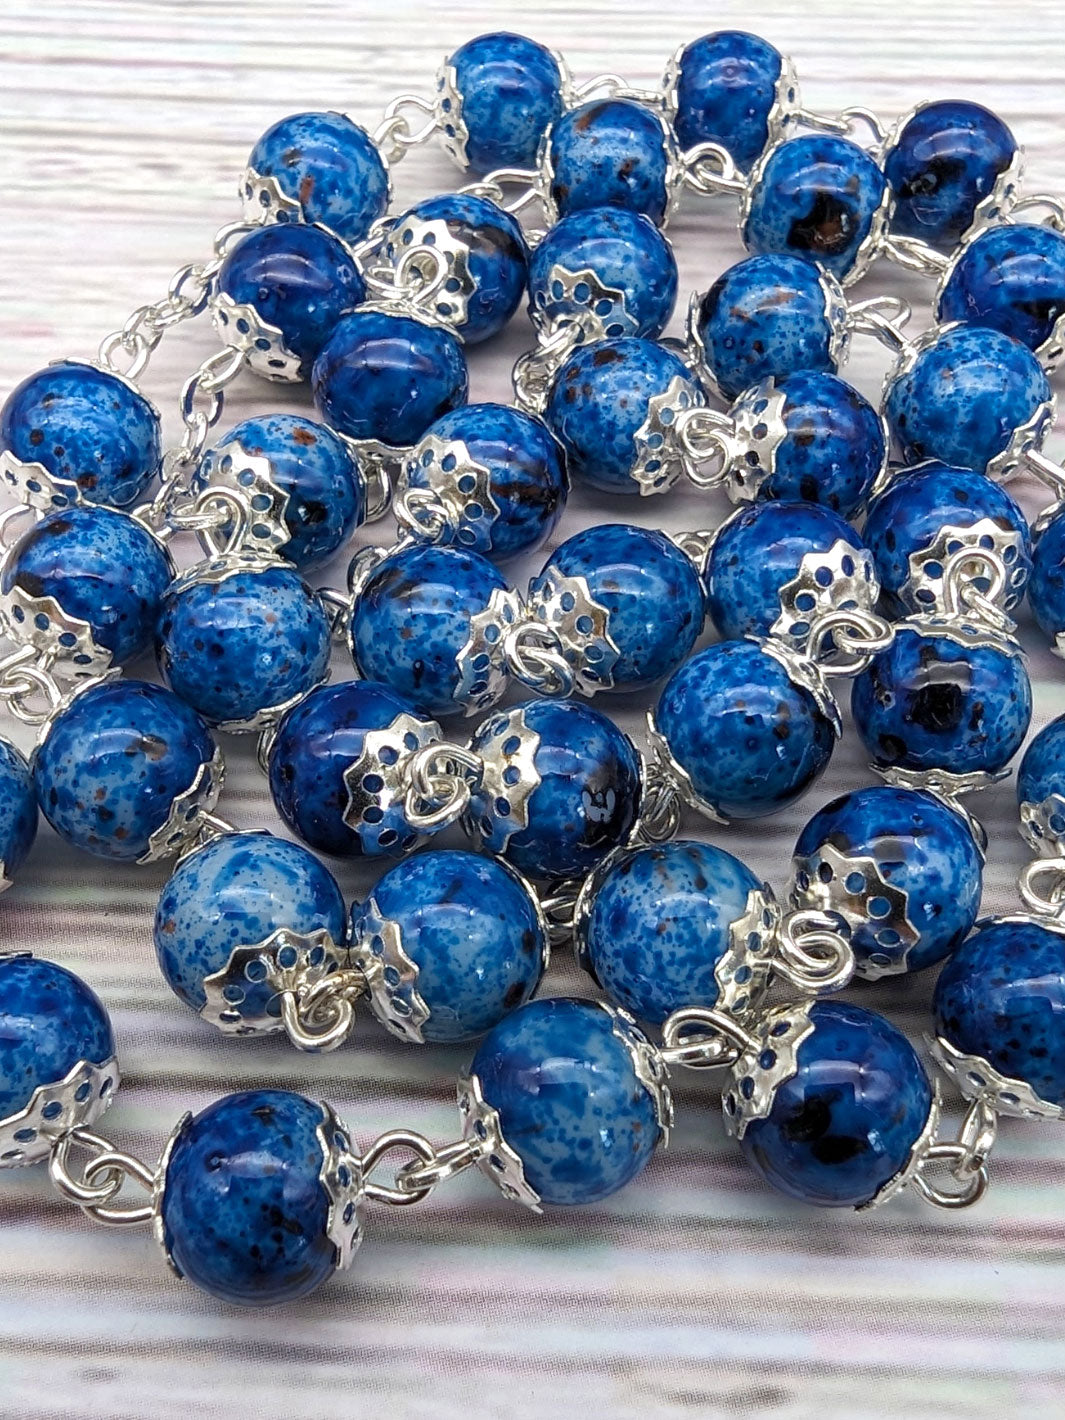 Handmade 8mm Blue Stained Glass Beads Our Lady of Fatima Rosary